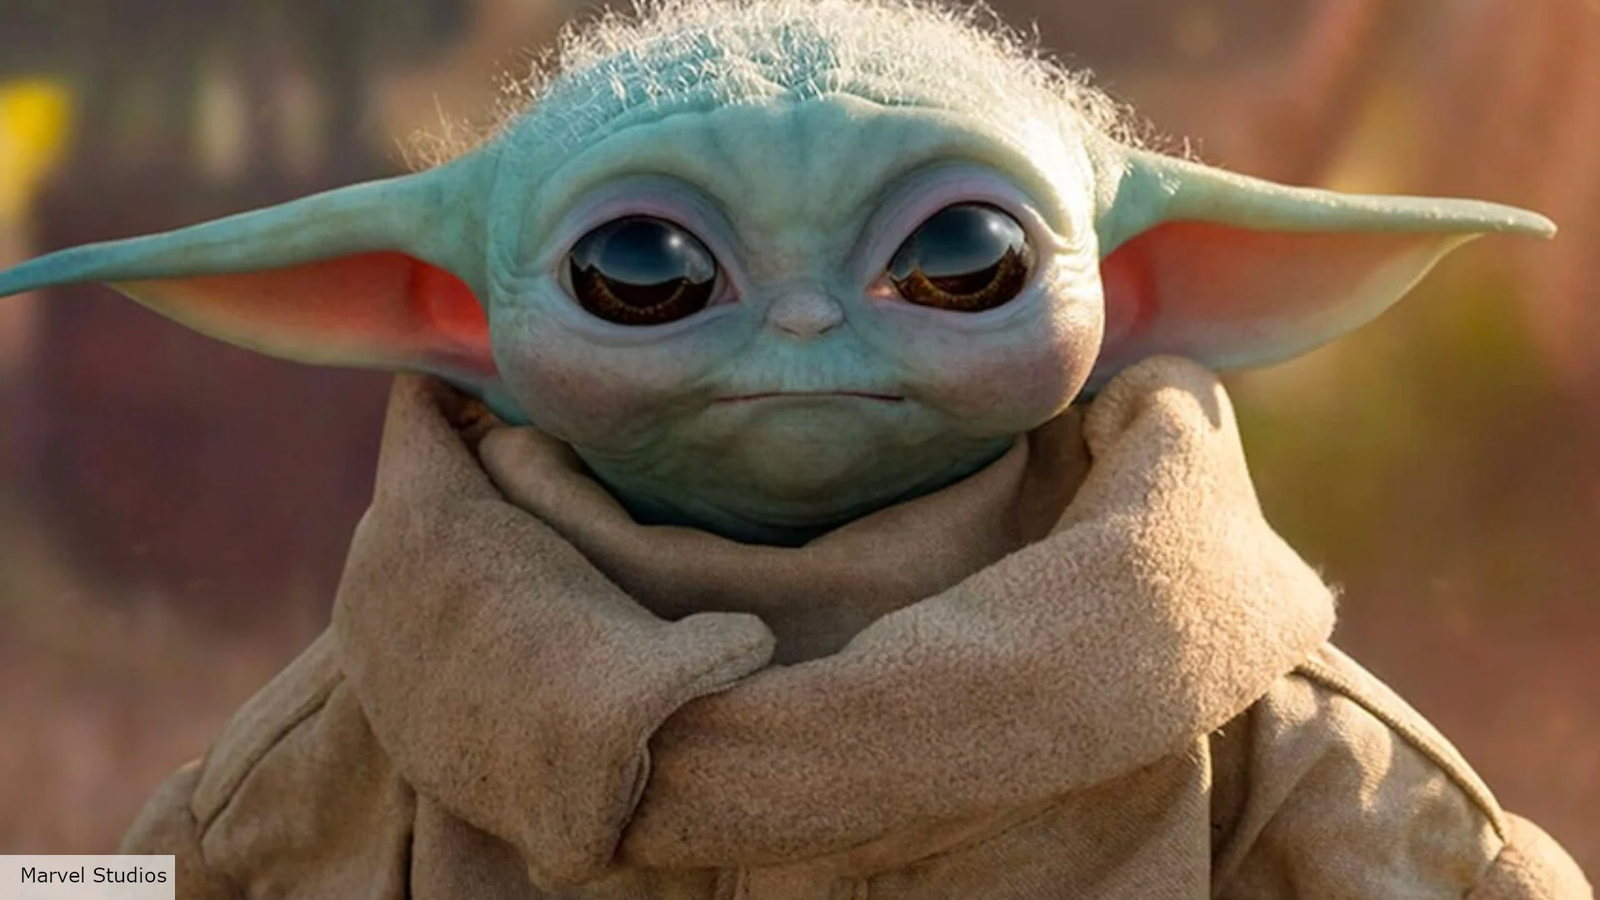 https://assetsio.reedpopcdn.com/star-wars-is-grogu-related-to-yoda.webp?width=1600&height=900&fit=crop&quality=100&format=png&enable=upscale&auto=webp